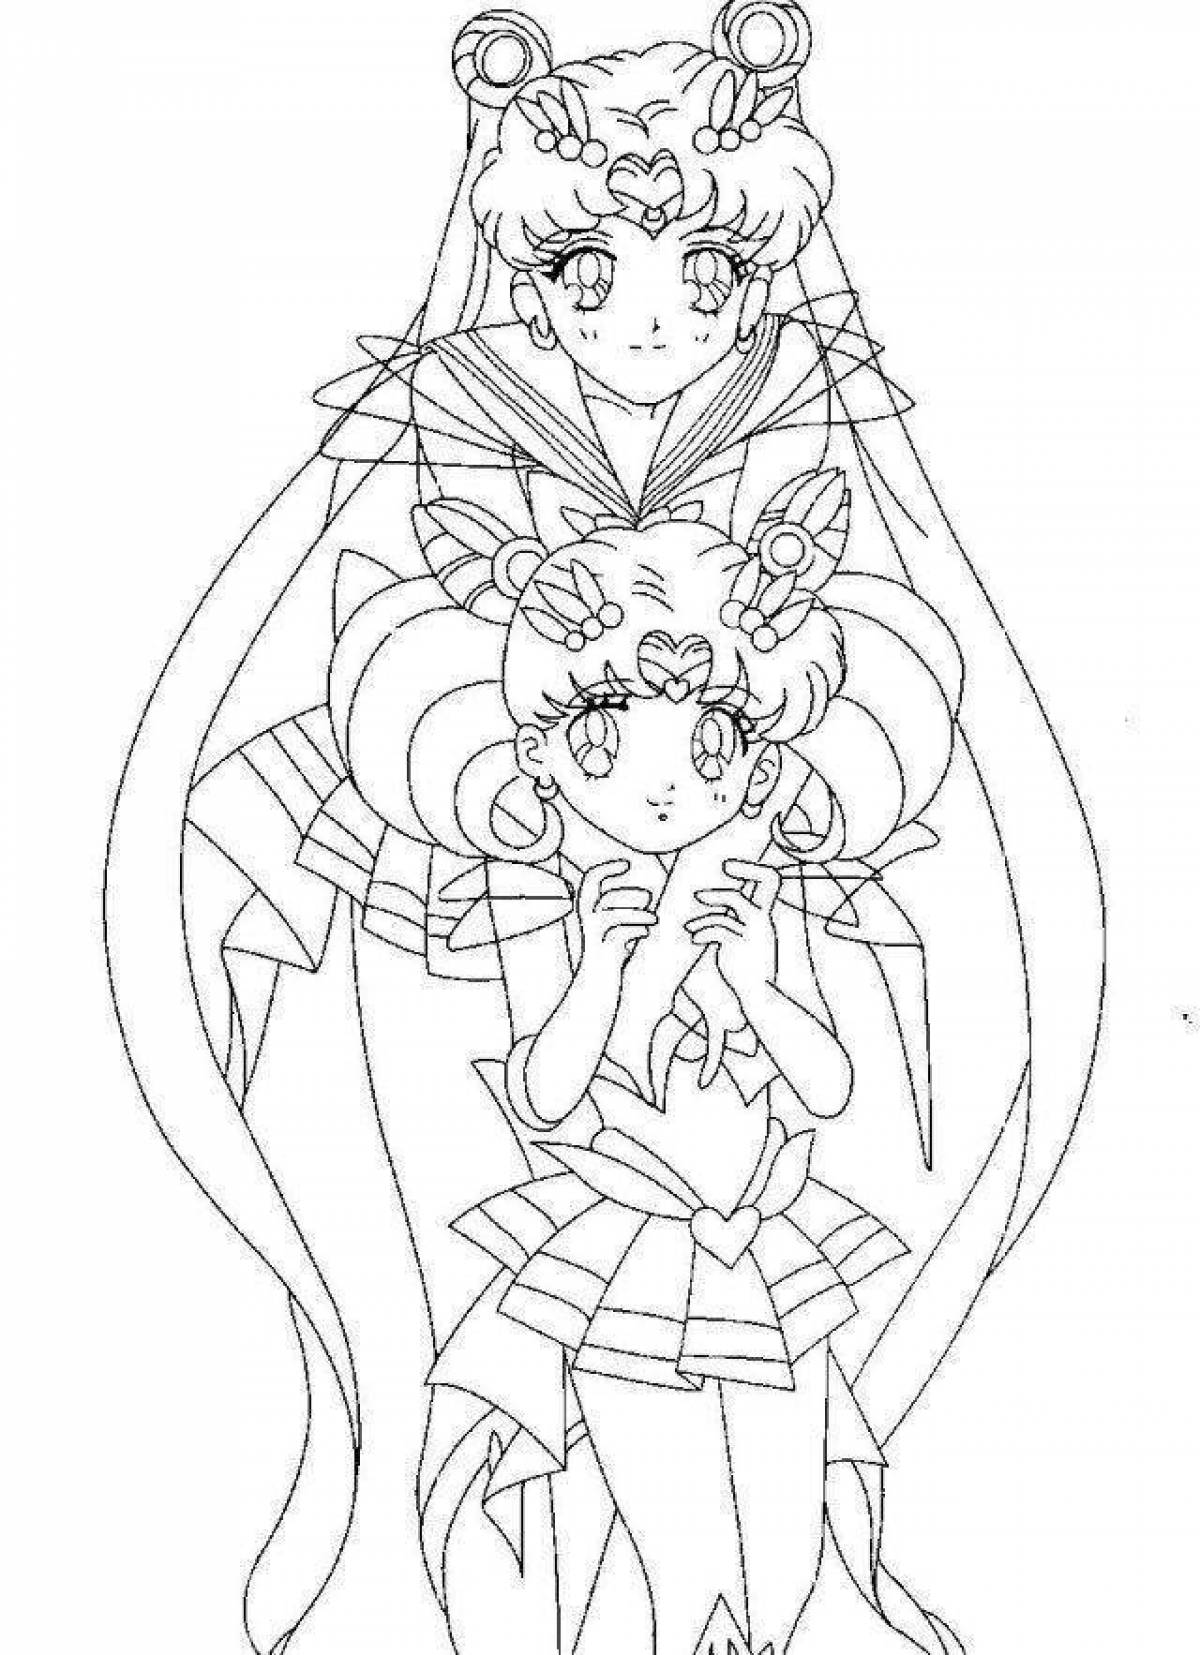 Coloring radiant sailor moon